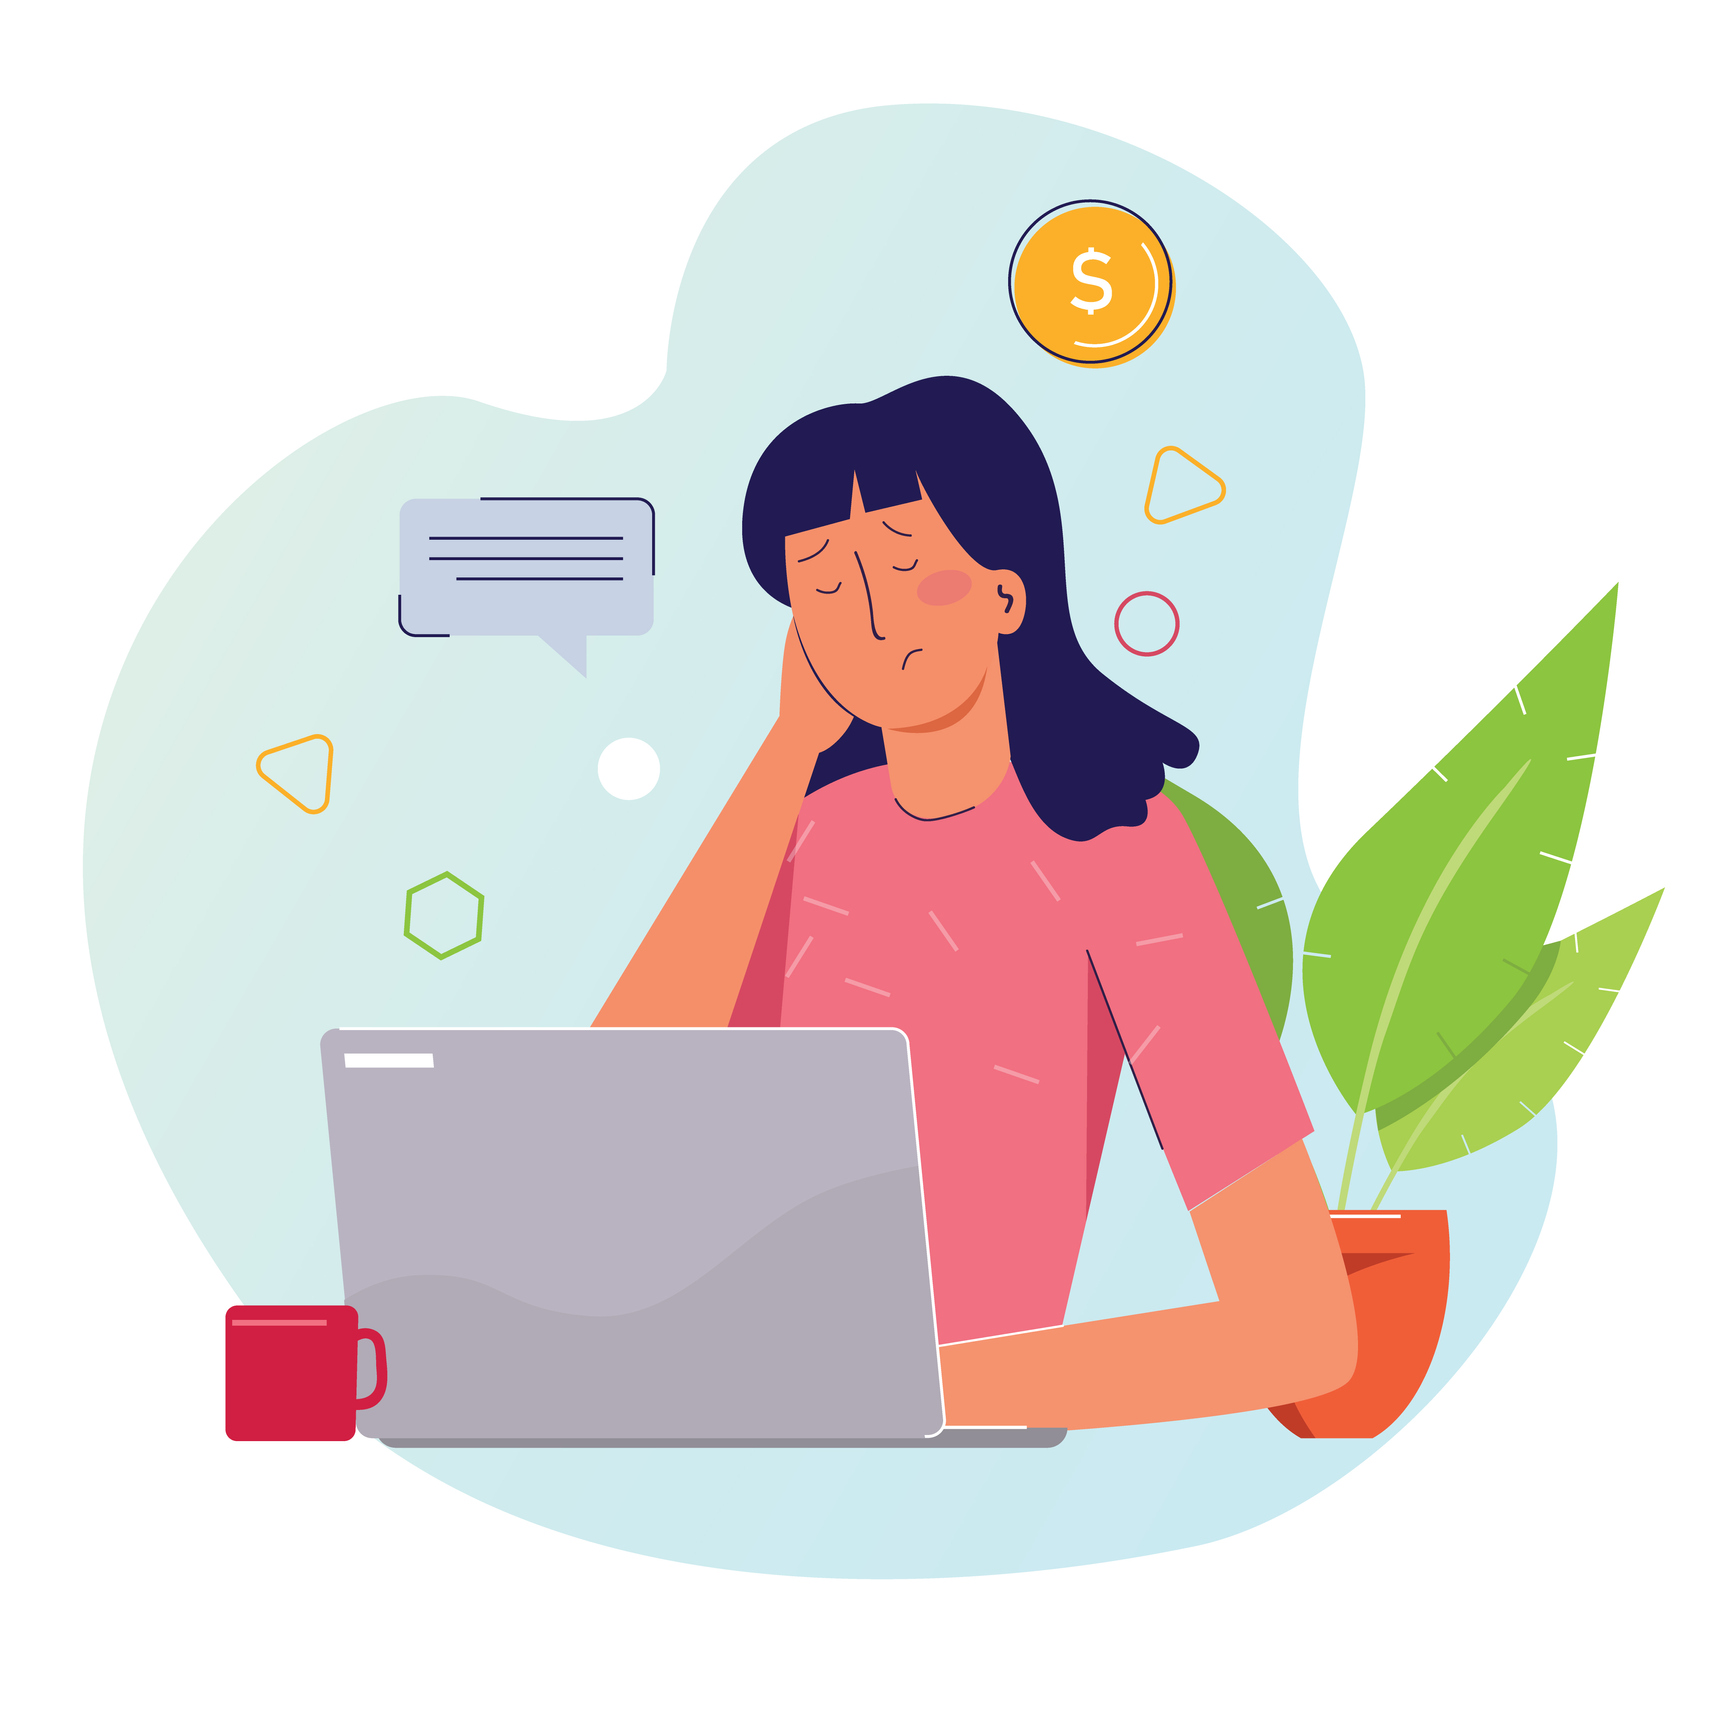 Illustration of person looking stressed on laptop with coin illustrations surrounding the image.